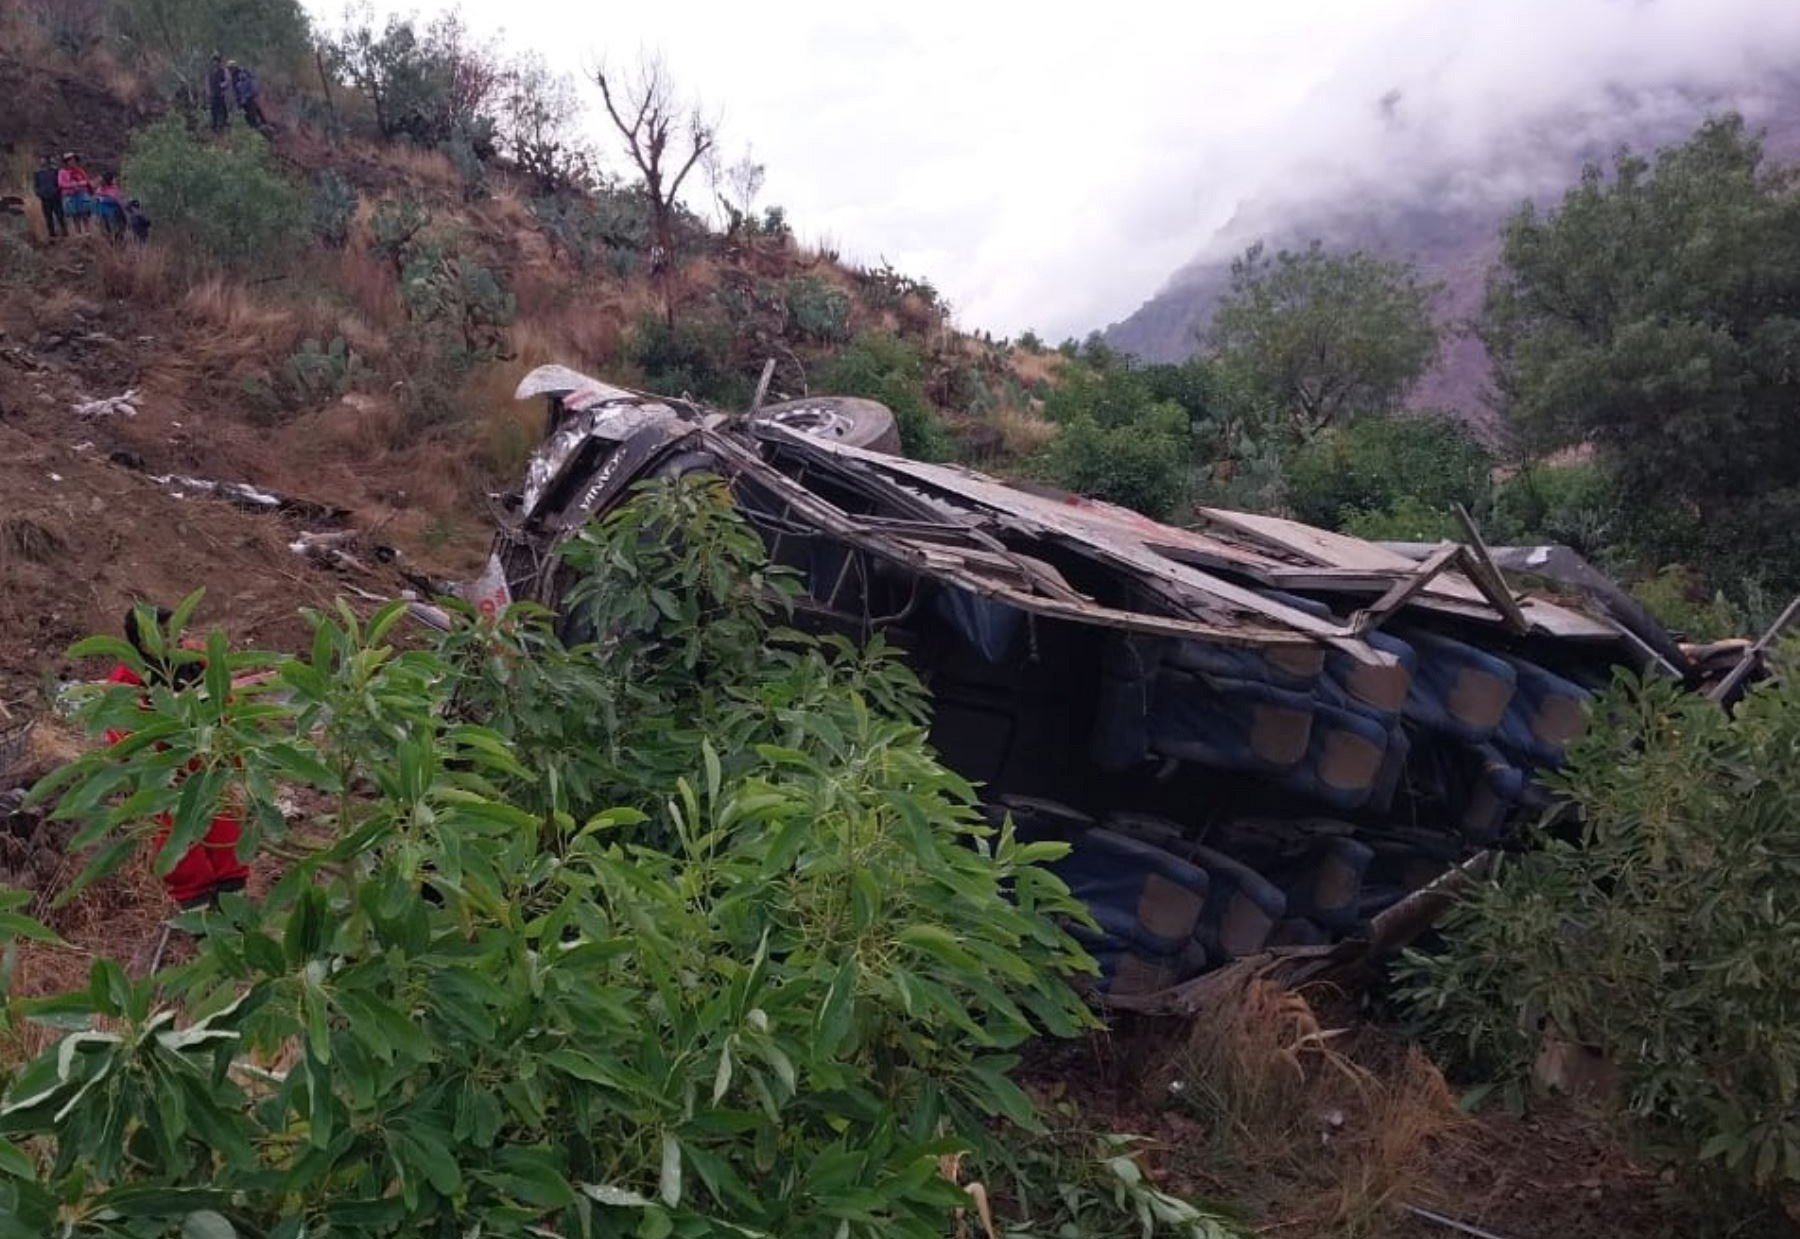 The wreckage of a bus that fell into a ravine in Huaccoto, Churcampa province, Peru on Monday. Photo: EPA-EFE / Agencia Andina / Handout